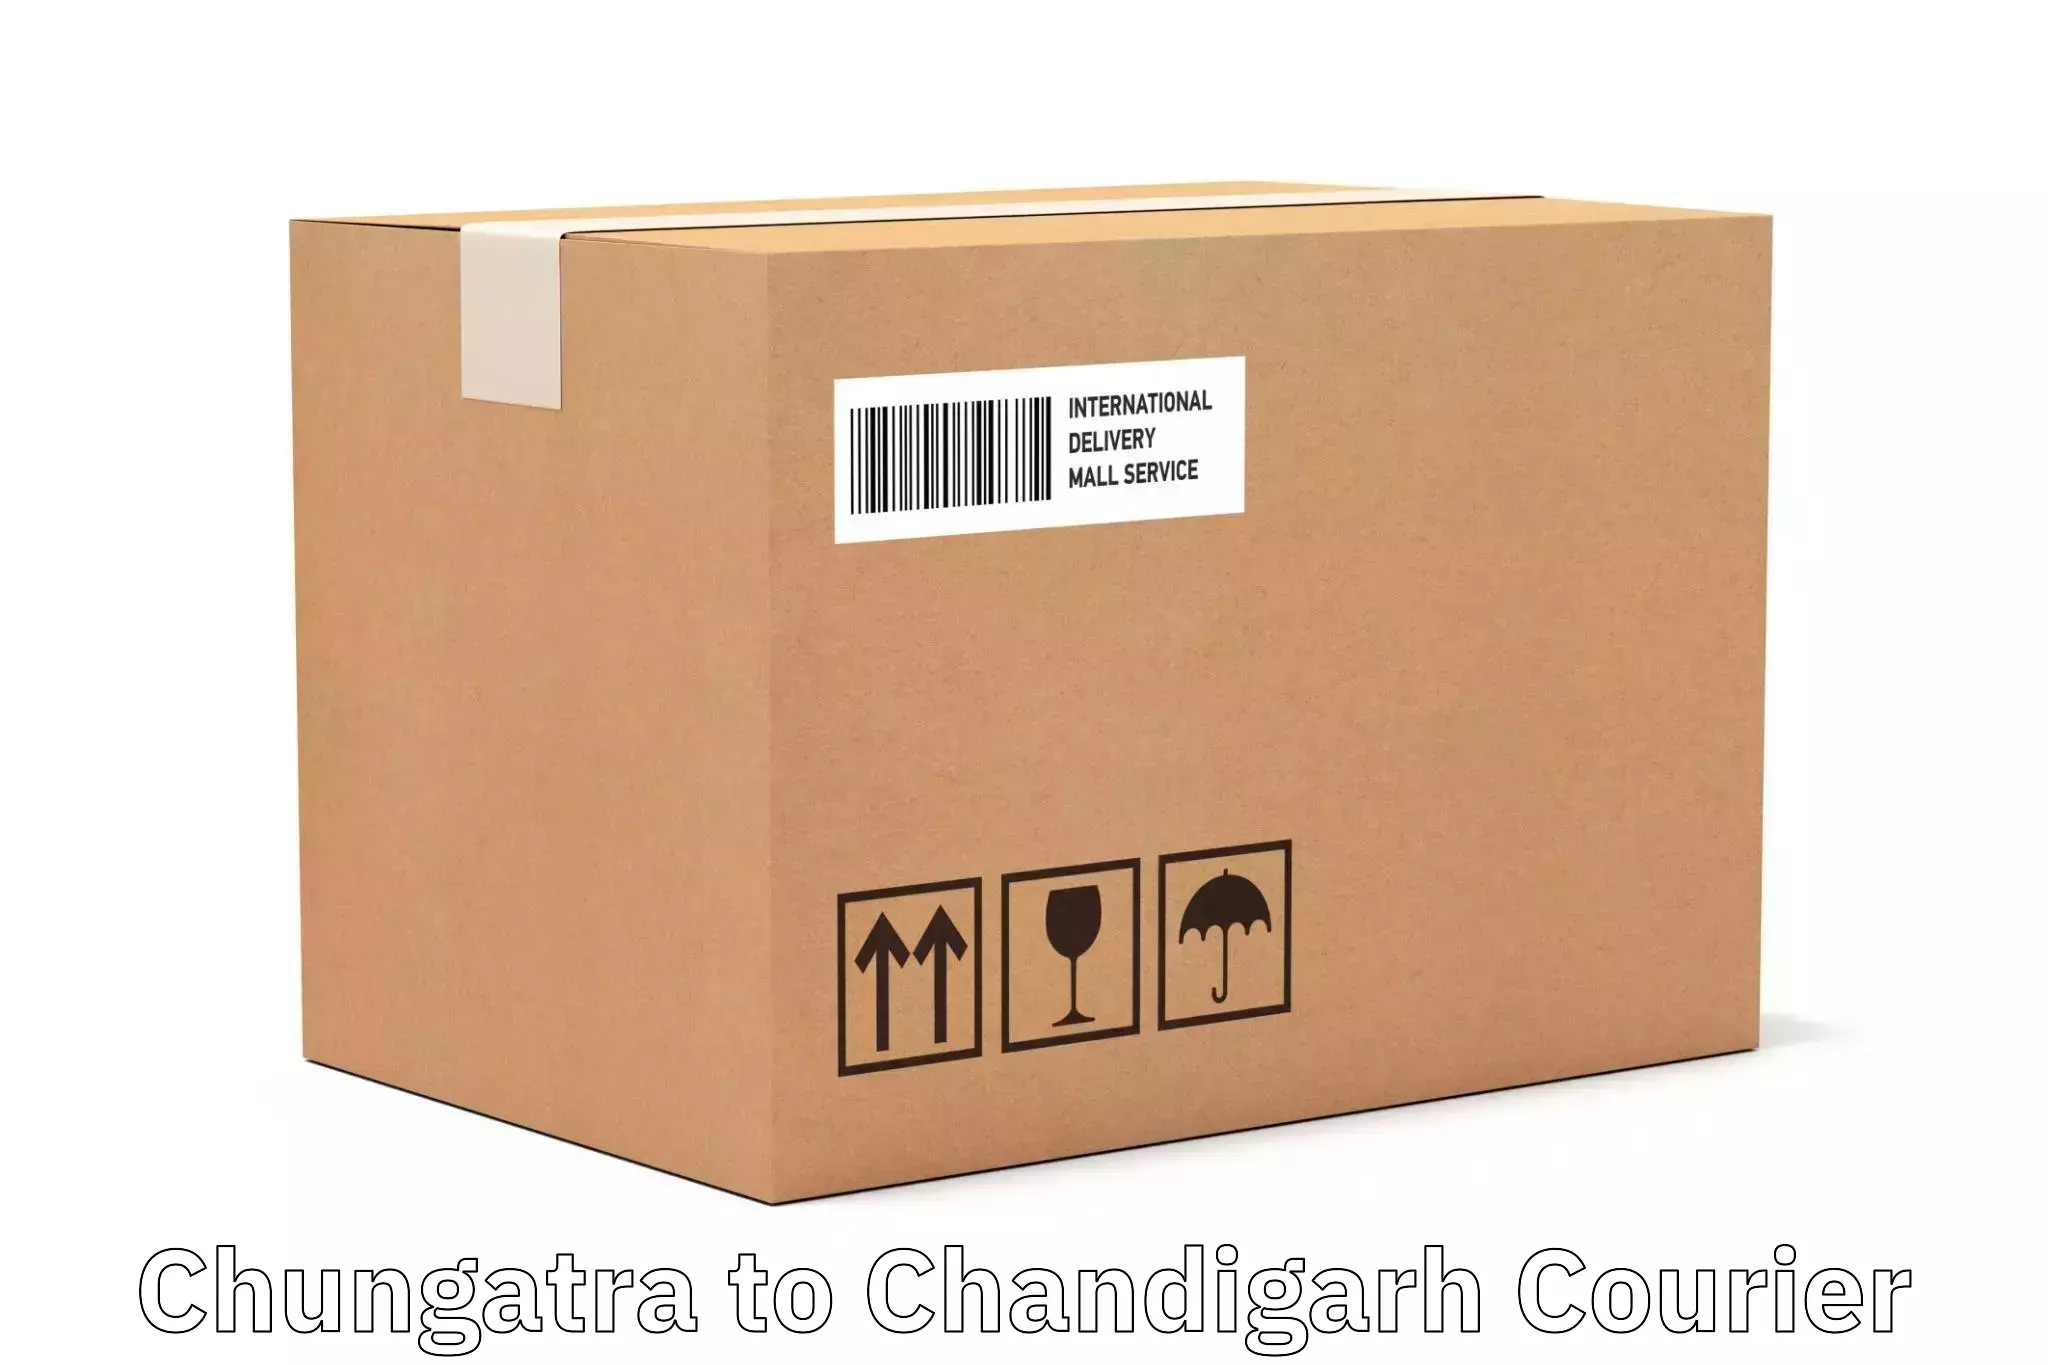 Express delivery capabilities Chungatra to Chandigarh